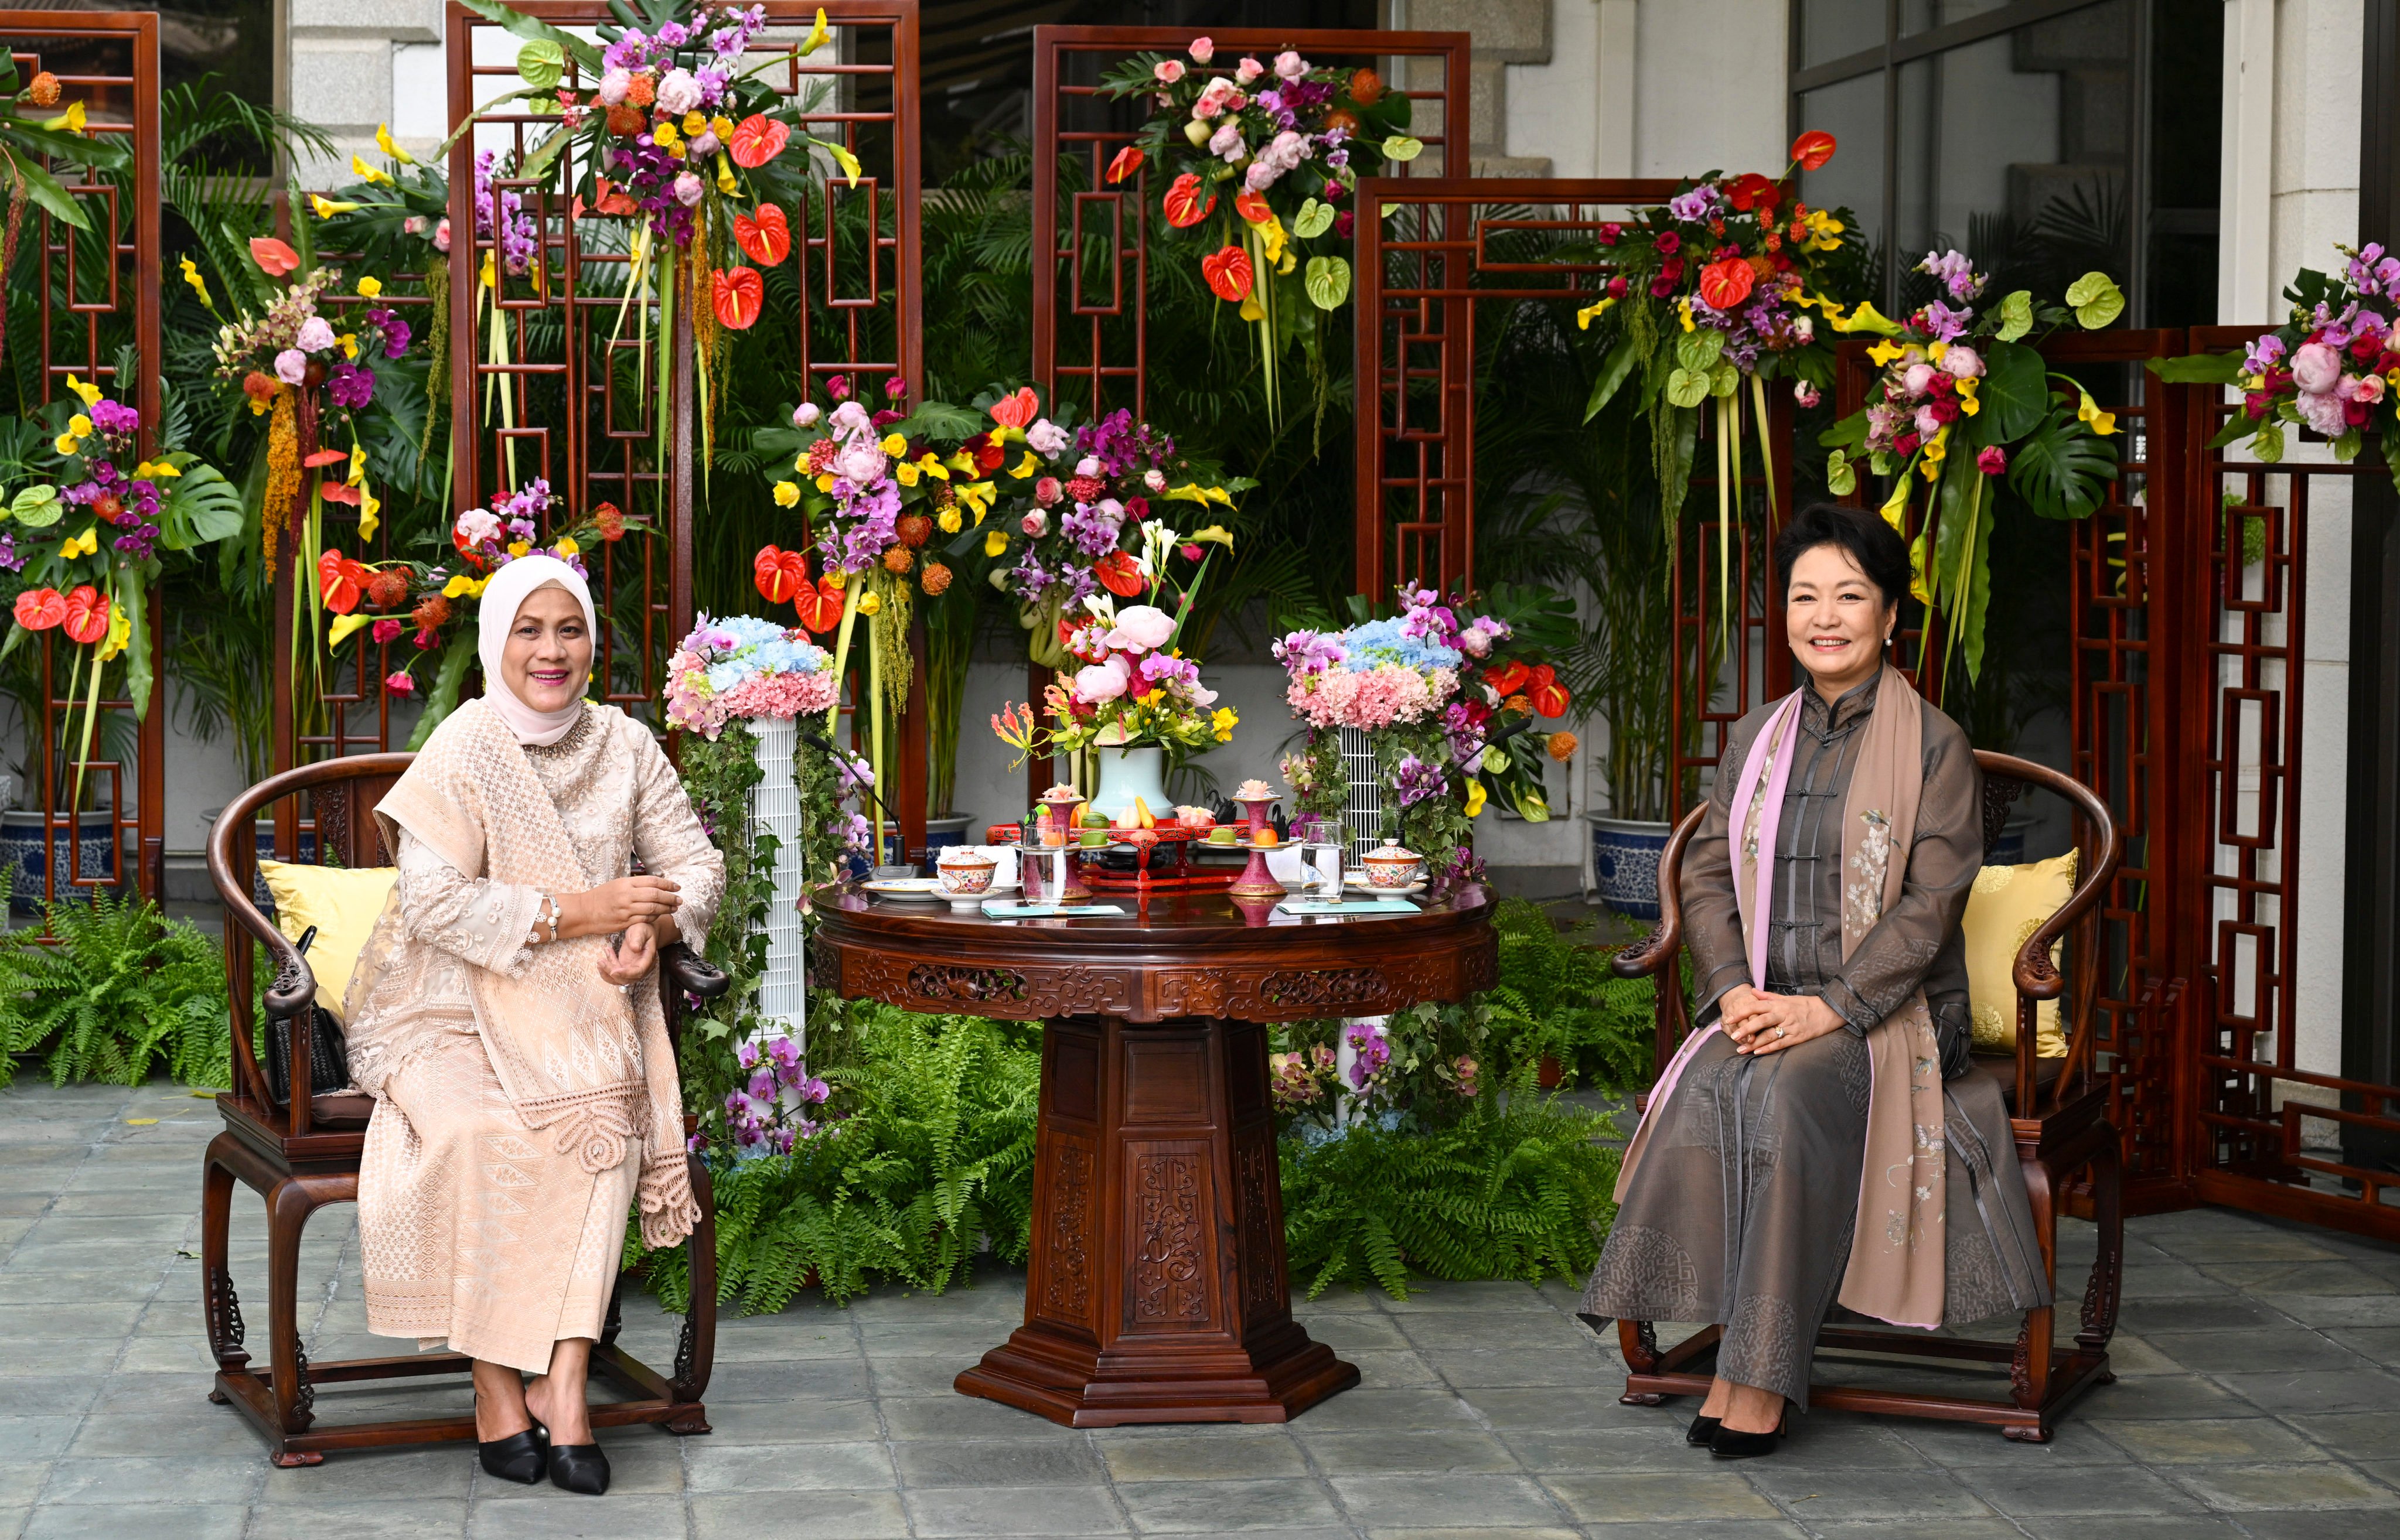 Indonesia’s first lady Iriana Joko Widodo (left) and her Chinese counterpart Peng Liyuan watch a performance at the Diaoyutai State Guest House in Beijing on Tuesday. Photo: Xinhua